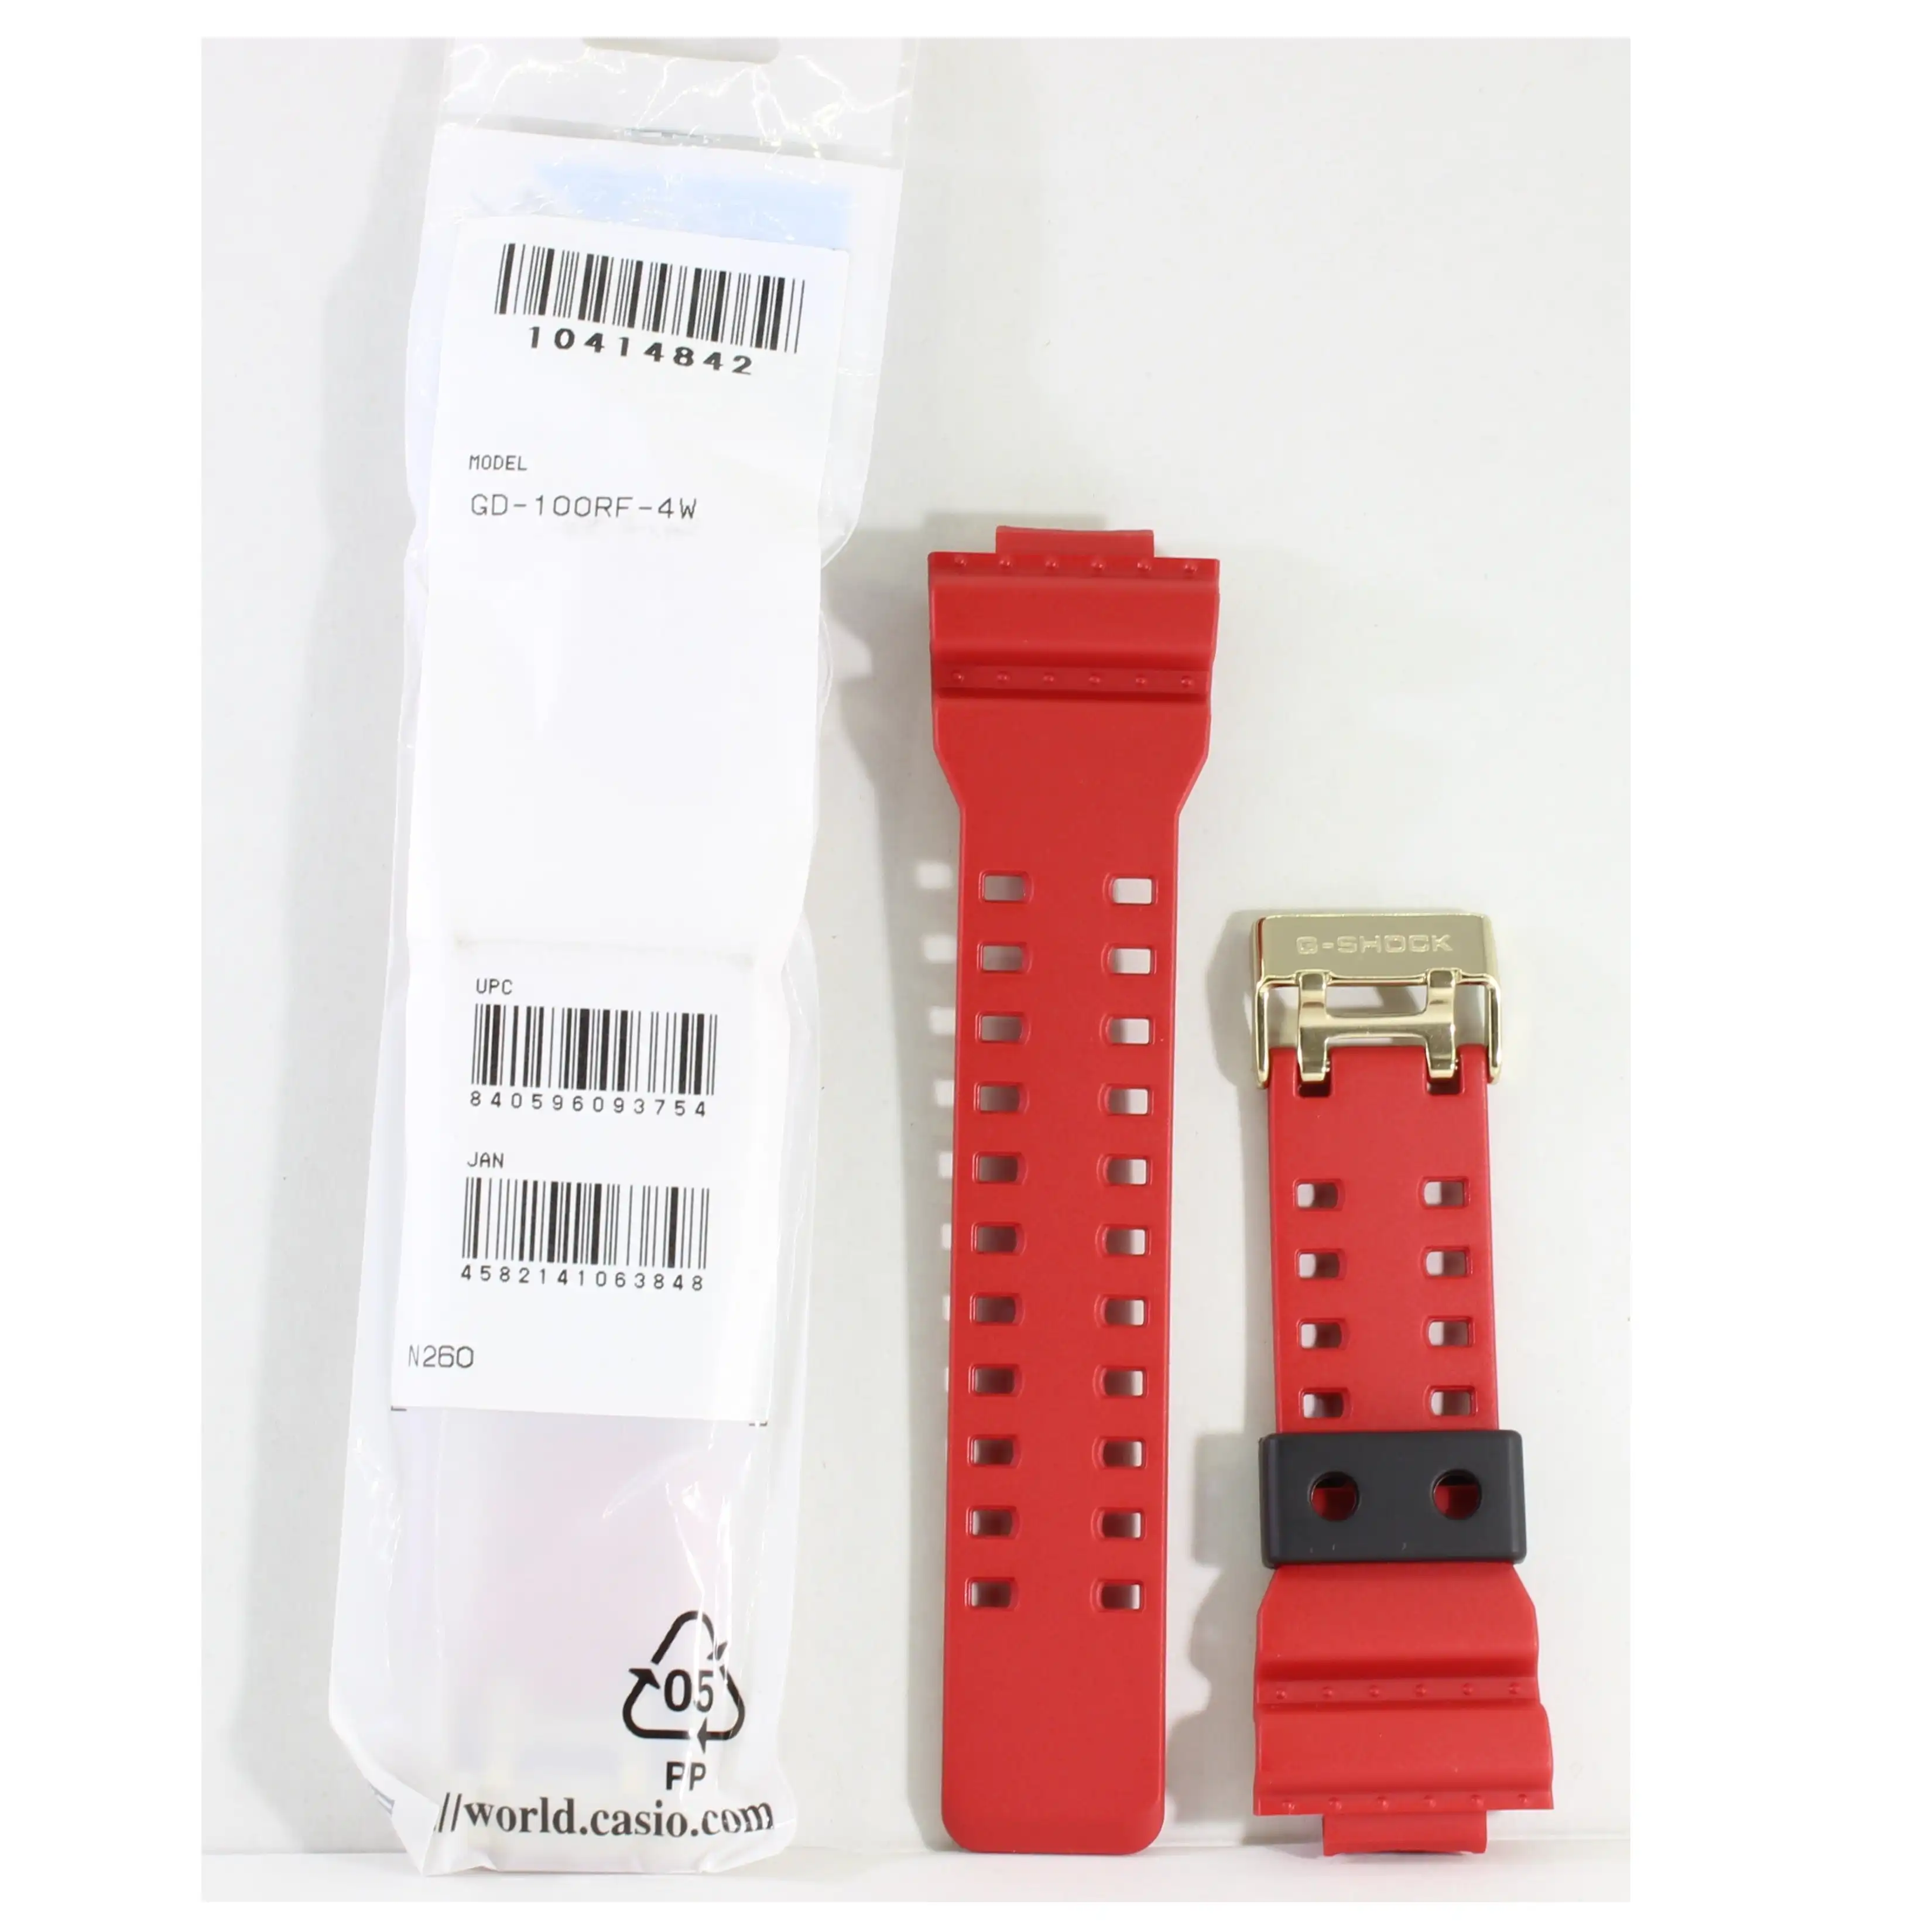 Casio G-Shock Shiny Red Genuine Replacement Strap 10414842 to suit GD-100RF-4